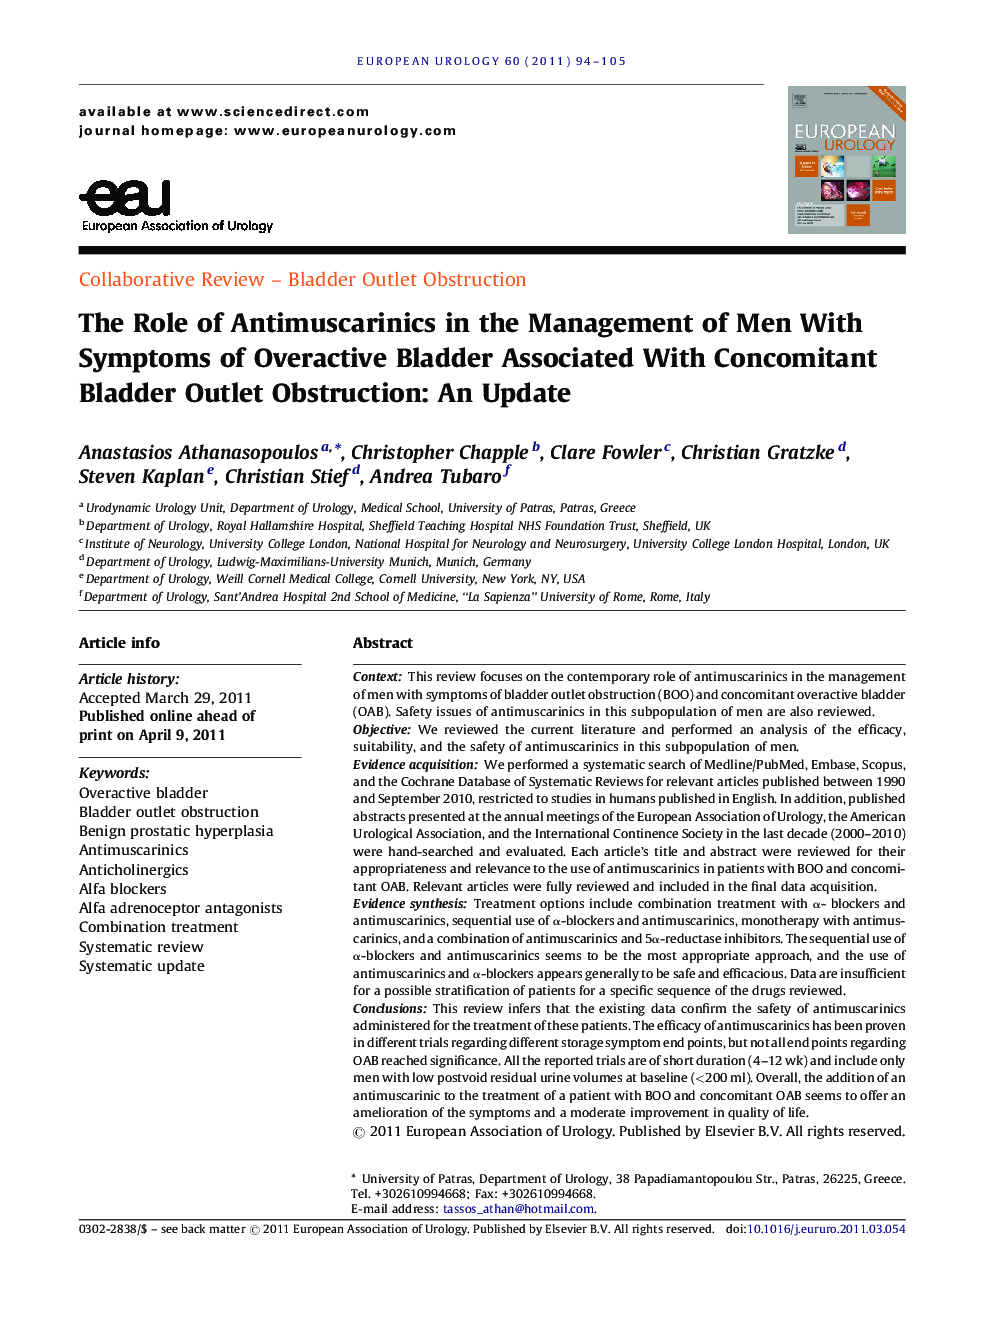 The Role of Antimuscarinics in the Management of Men With Symptoms of Overactive Bladder Associated With Concomitant Bladder Outlet Obstruction: An Update